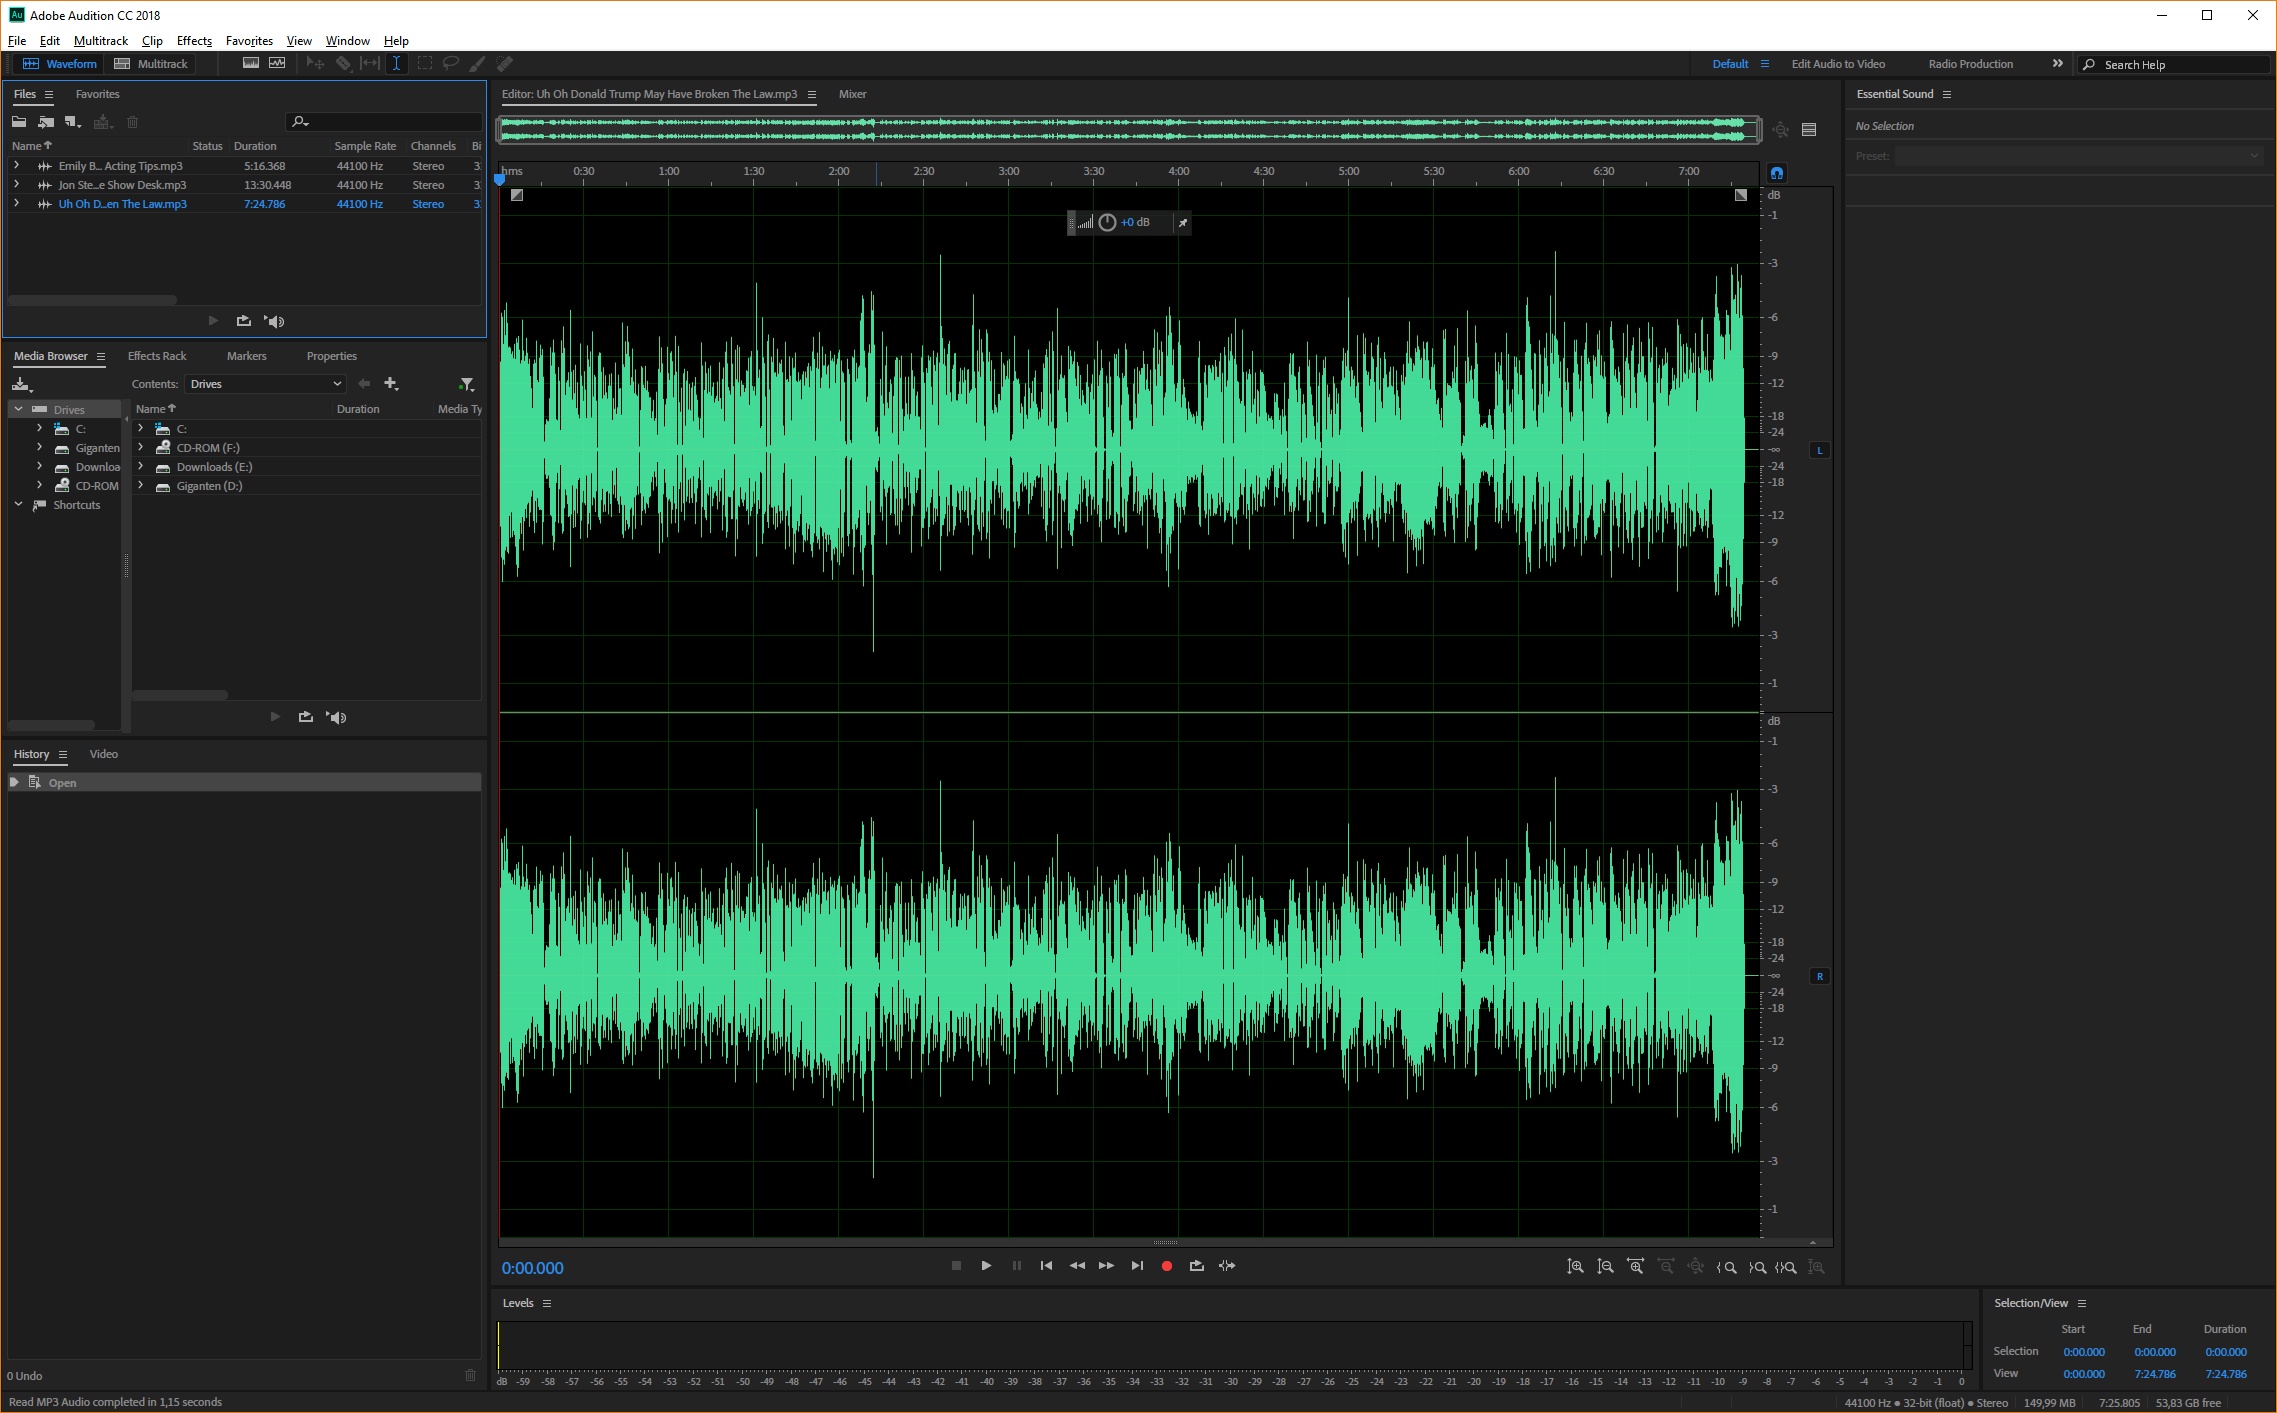 adobe audition 3.0 free download full version